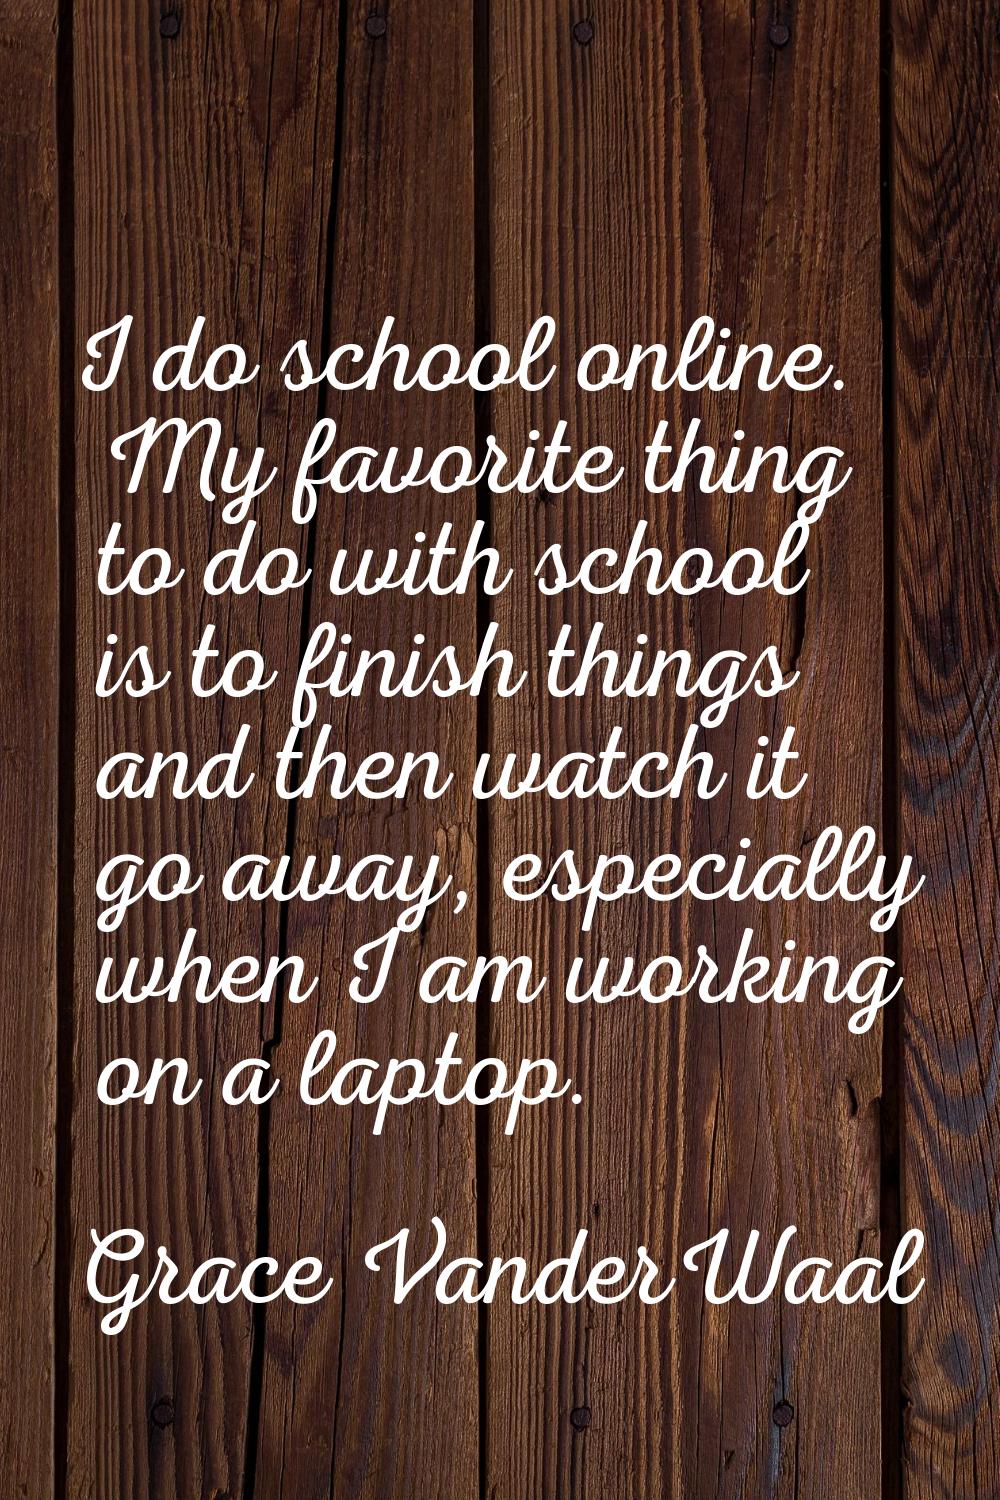 I do school online. My favorite thing to do with school is to finish things and then watch it go aw